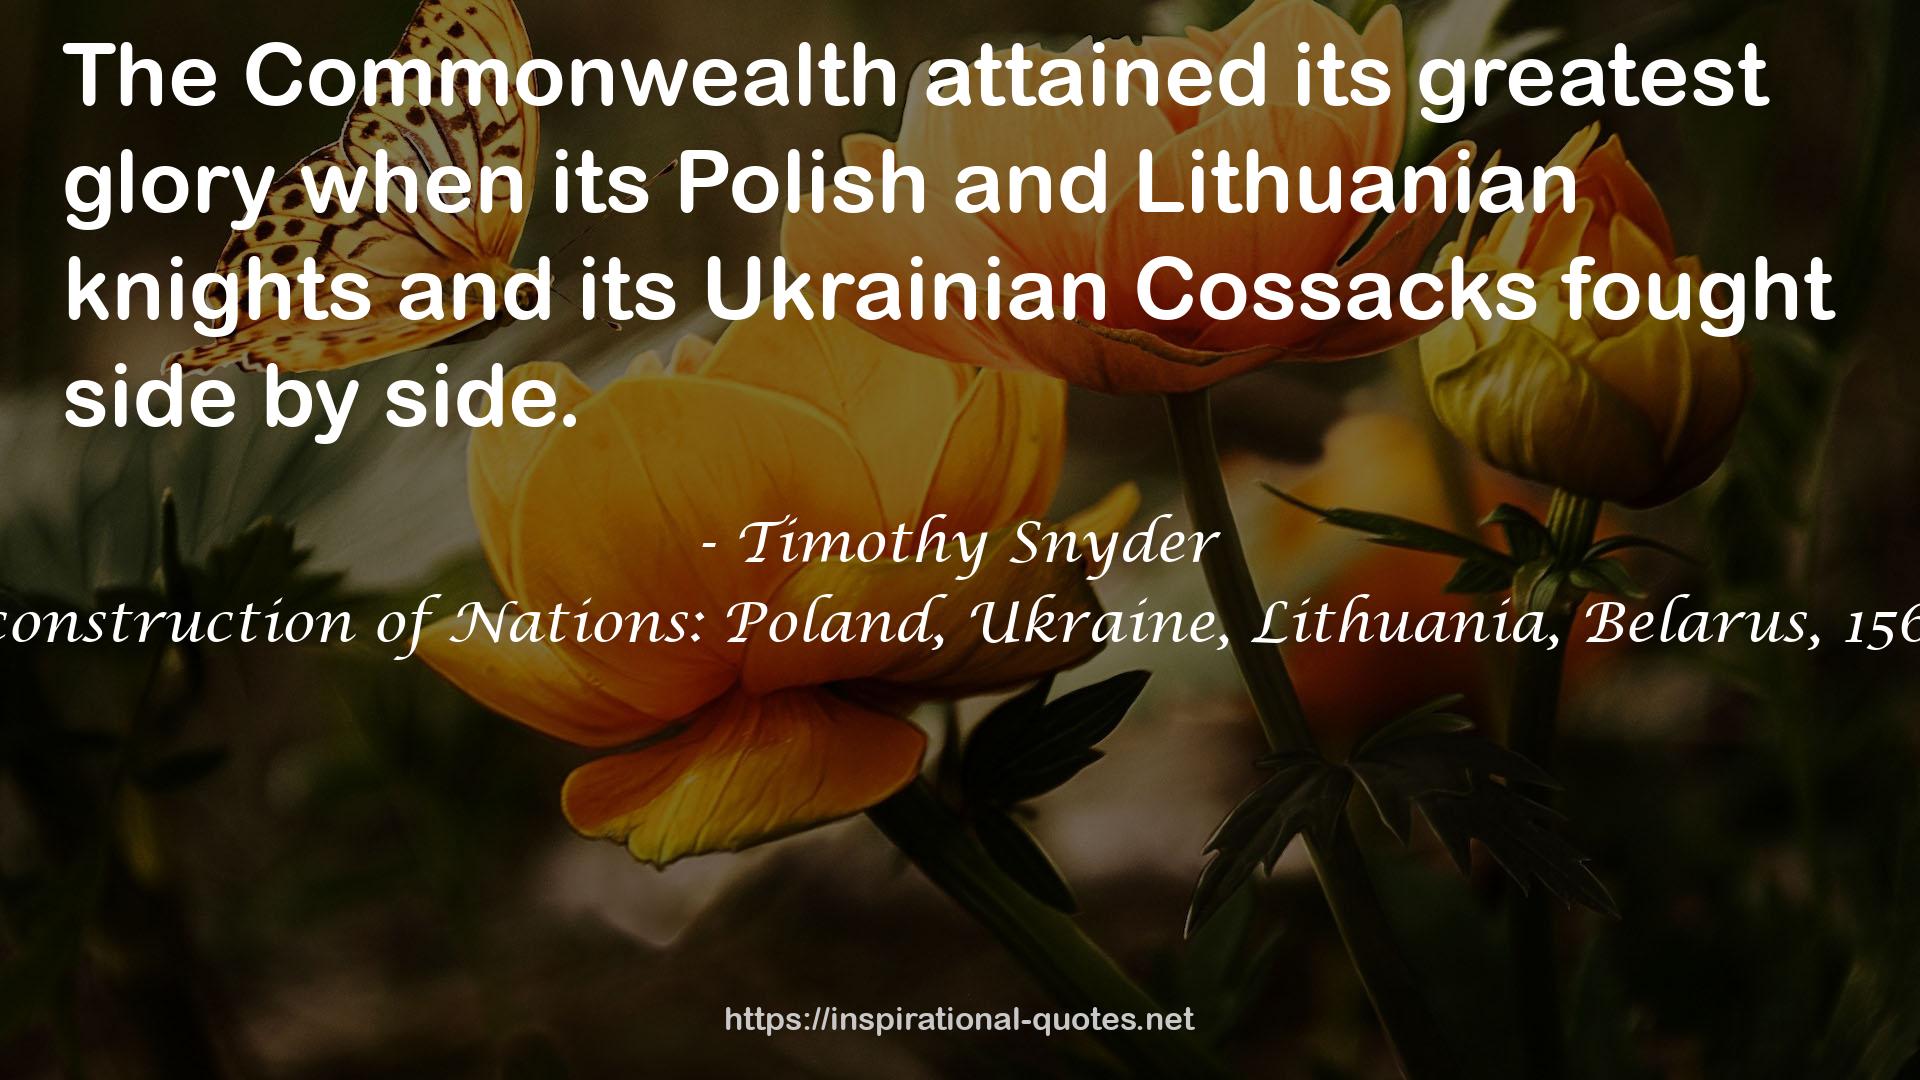 The Reconstruction of Nations: Poland, Ukraine, Lithuania, Belarus, 1569 - 1999 QUOTES